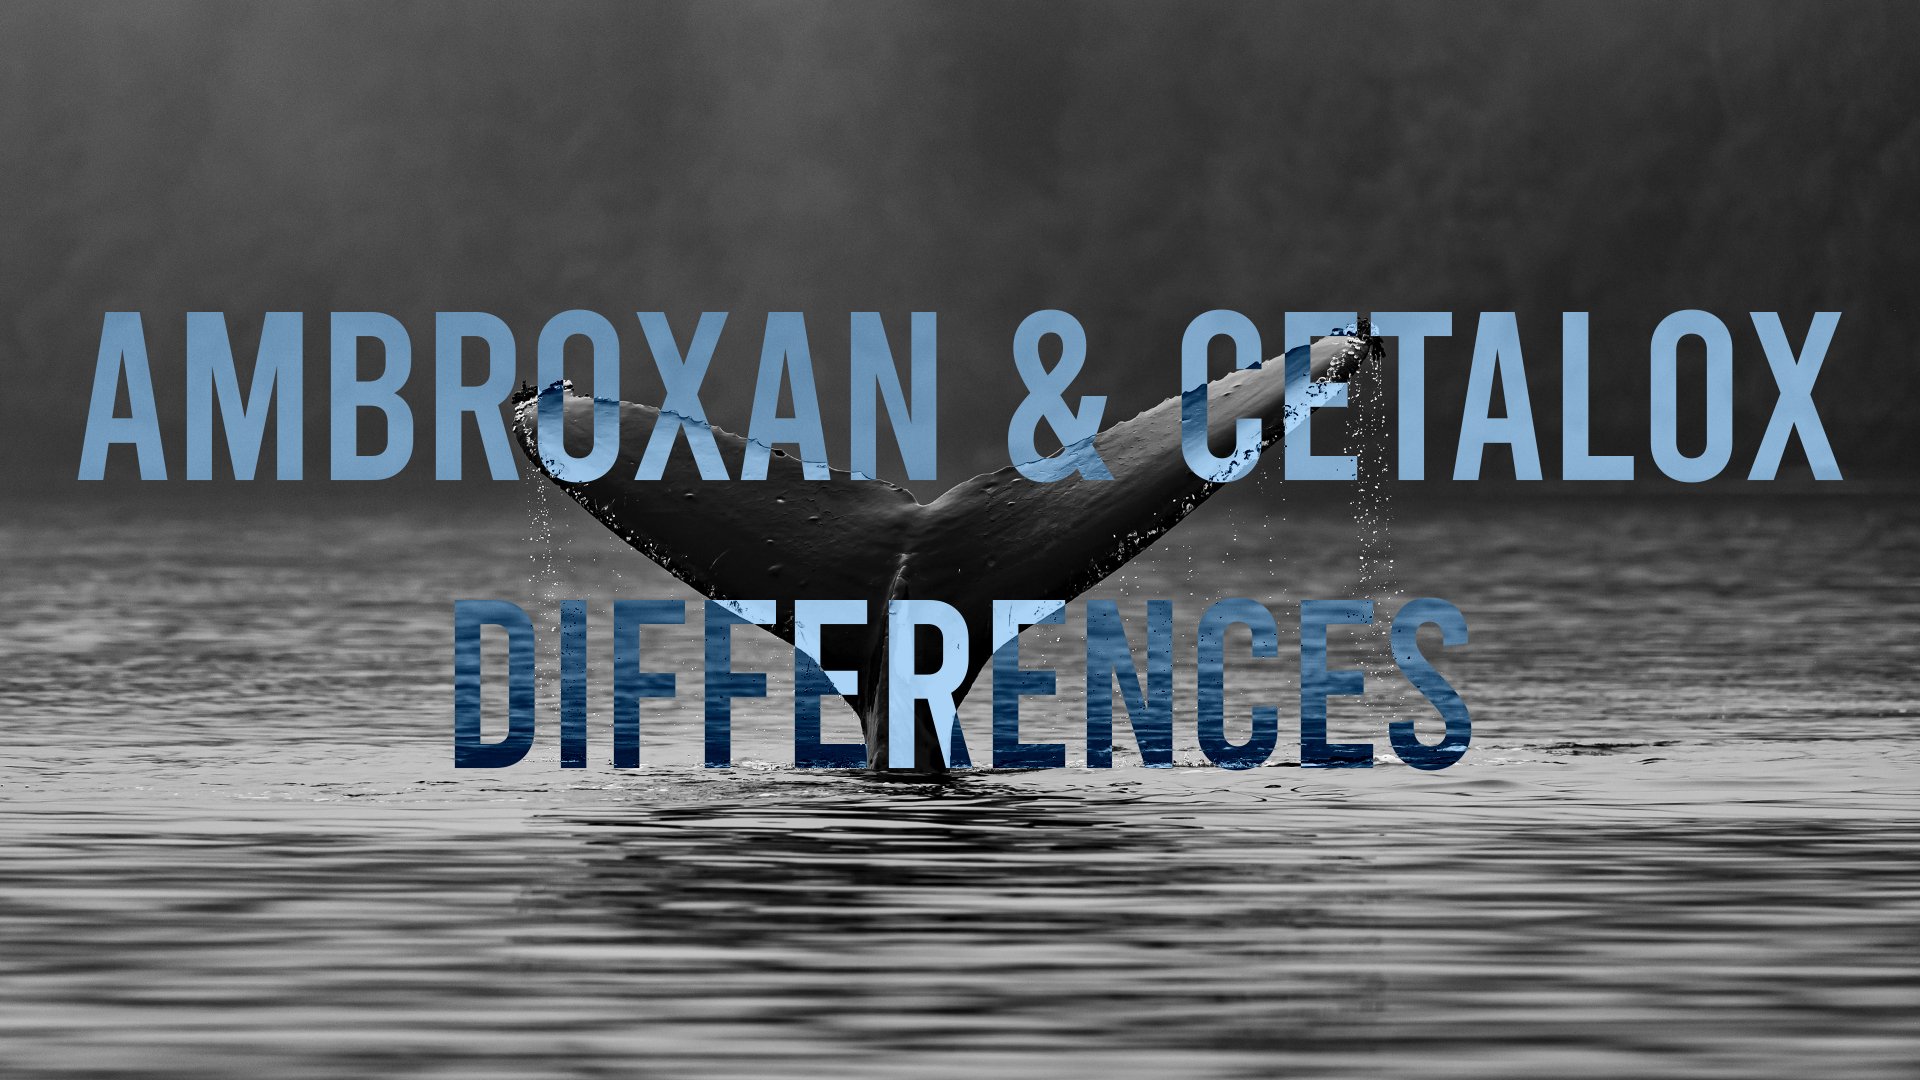 Ambroxan and Cetalox Differences - Blog — Scentspiracy